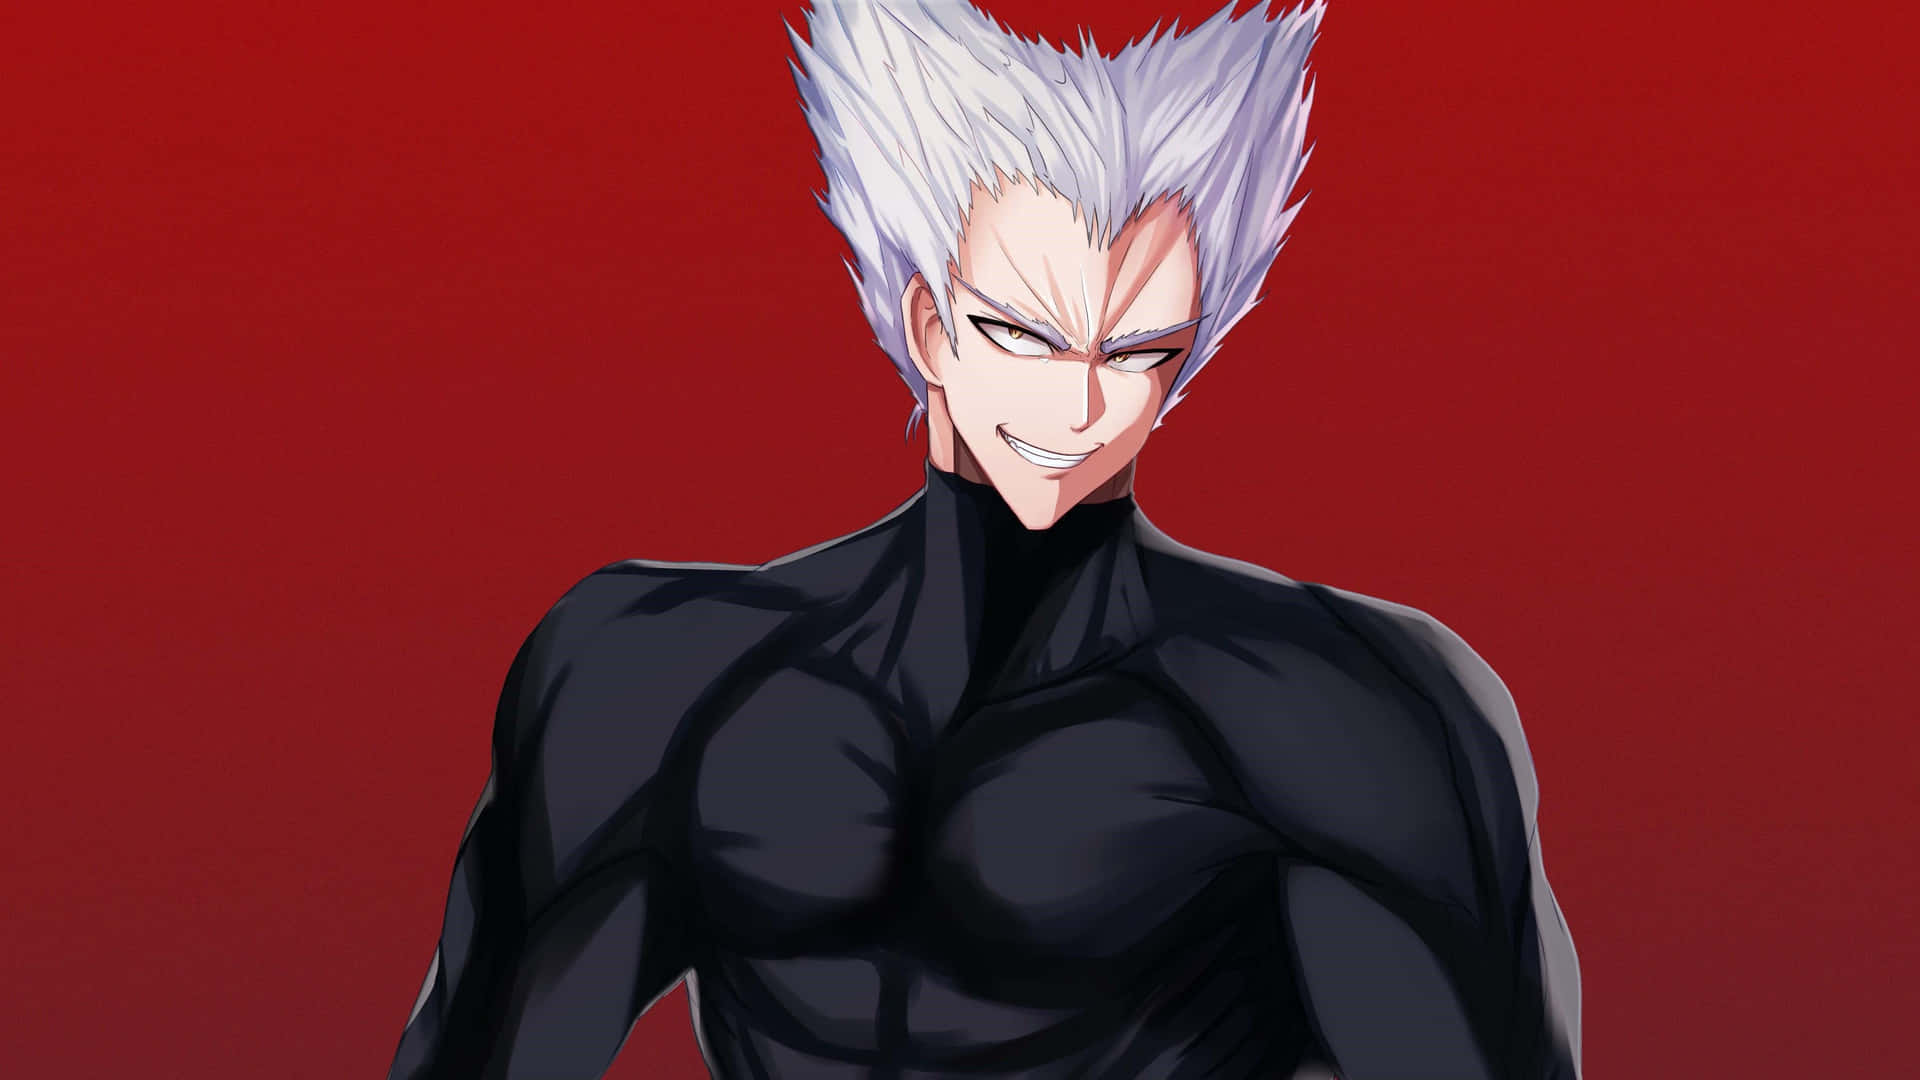 Garou (One Punch Man) wallpapers for desktop, download free Garou (One  Punch Man) pictures and backgrounds for PC